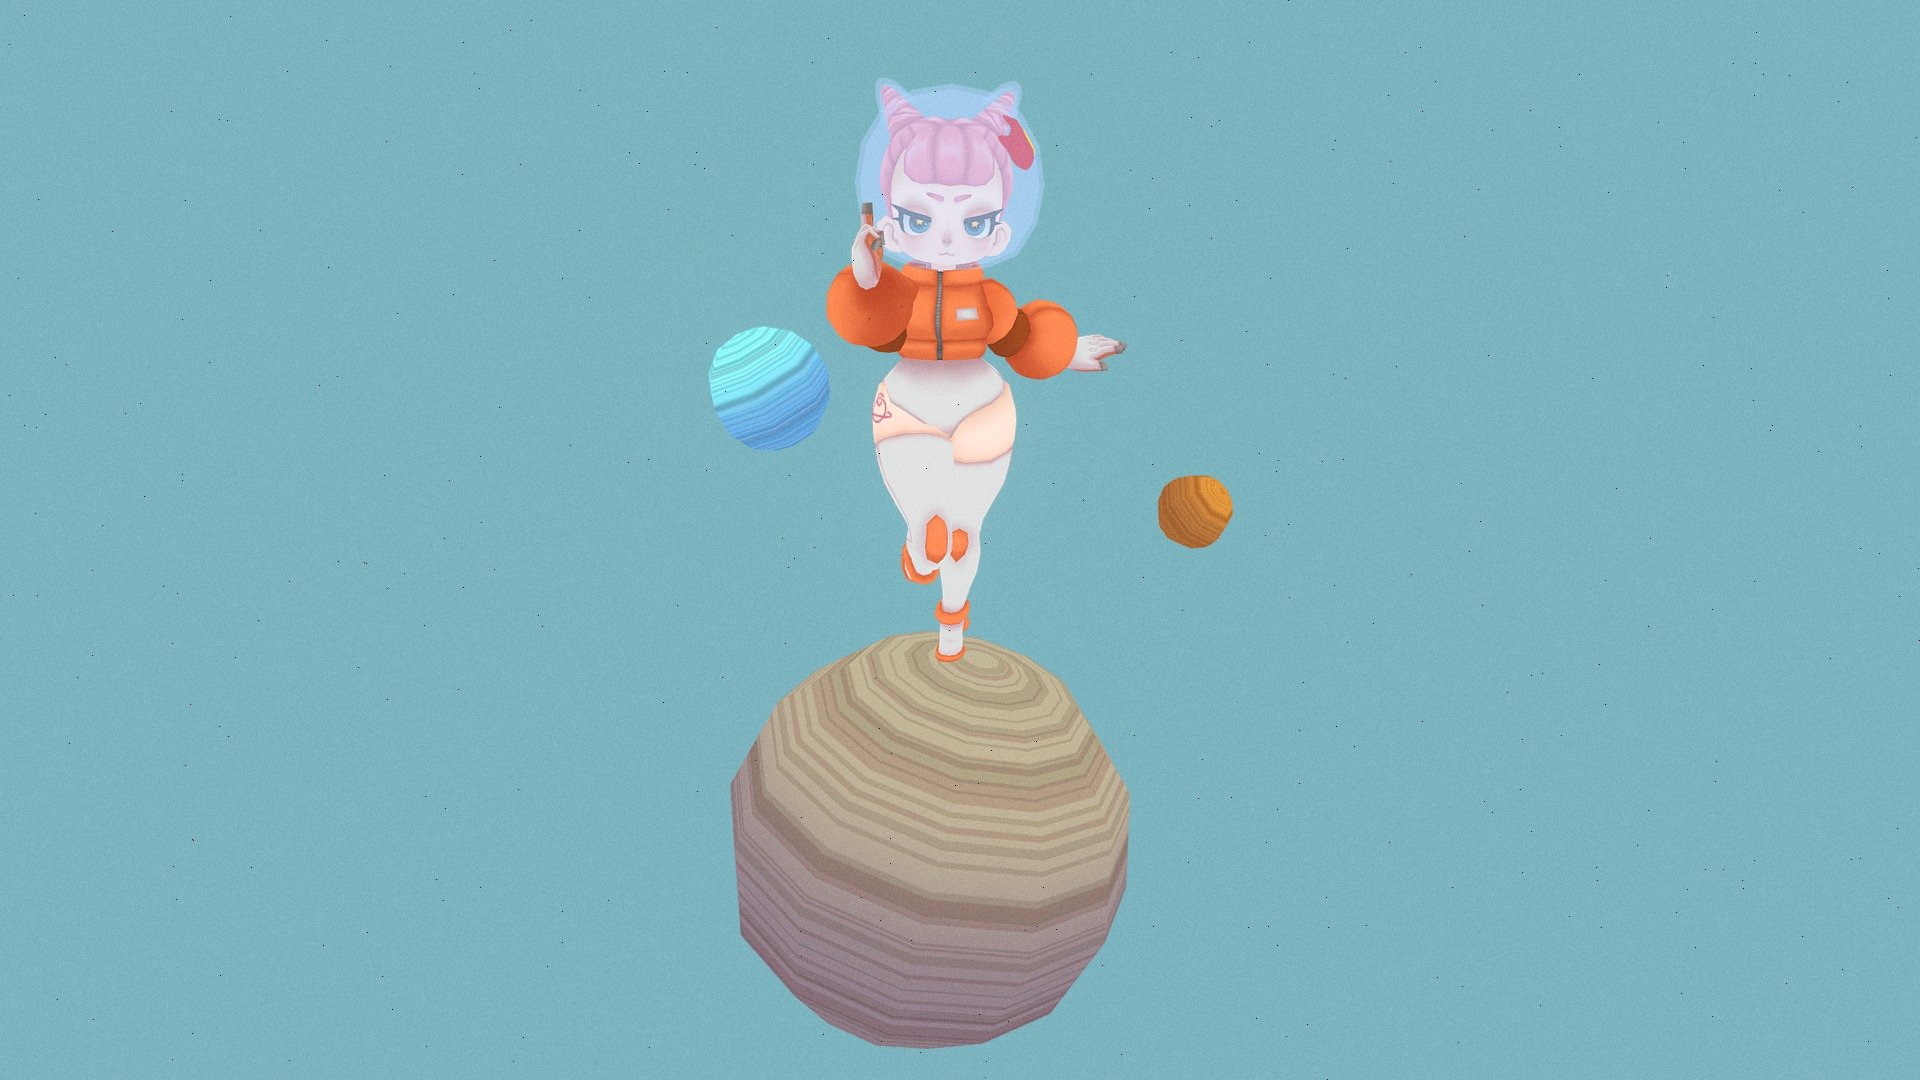 Original character - cat like girl in a sexy space suit.
modeled in Maya and textured in Krita 3d model